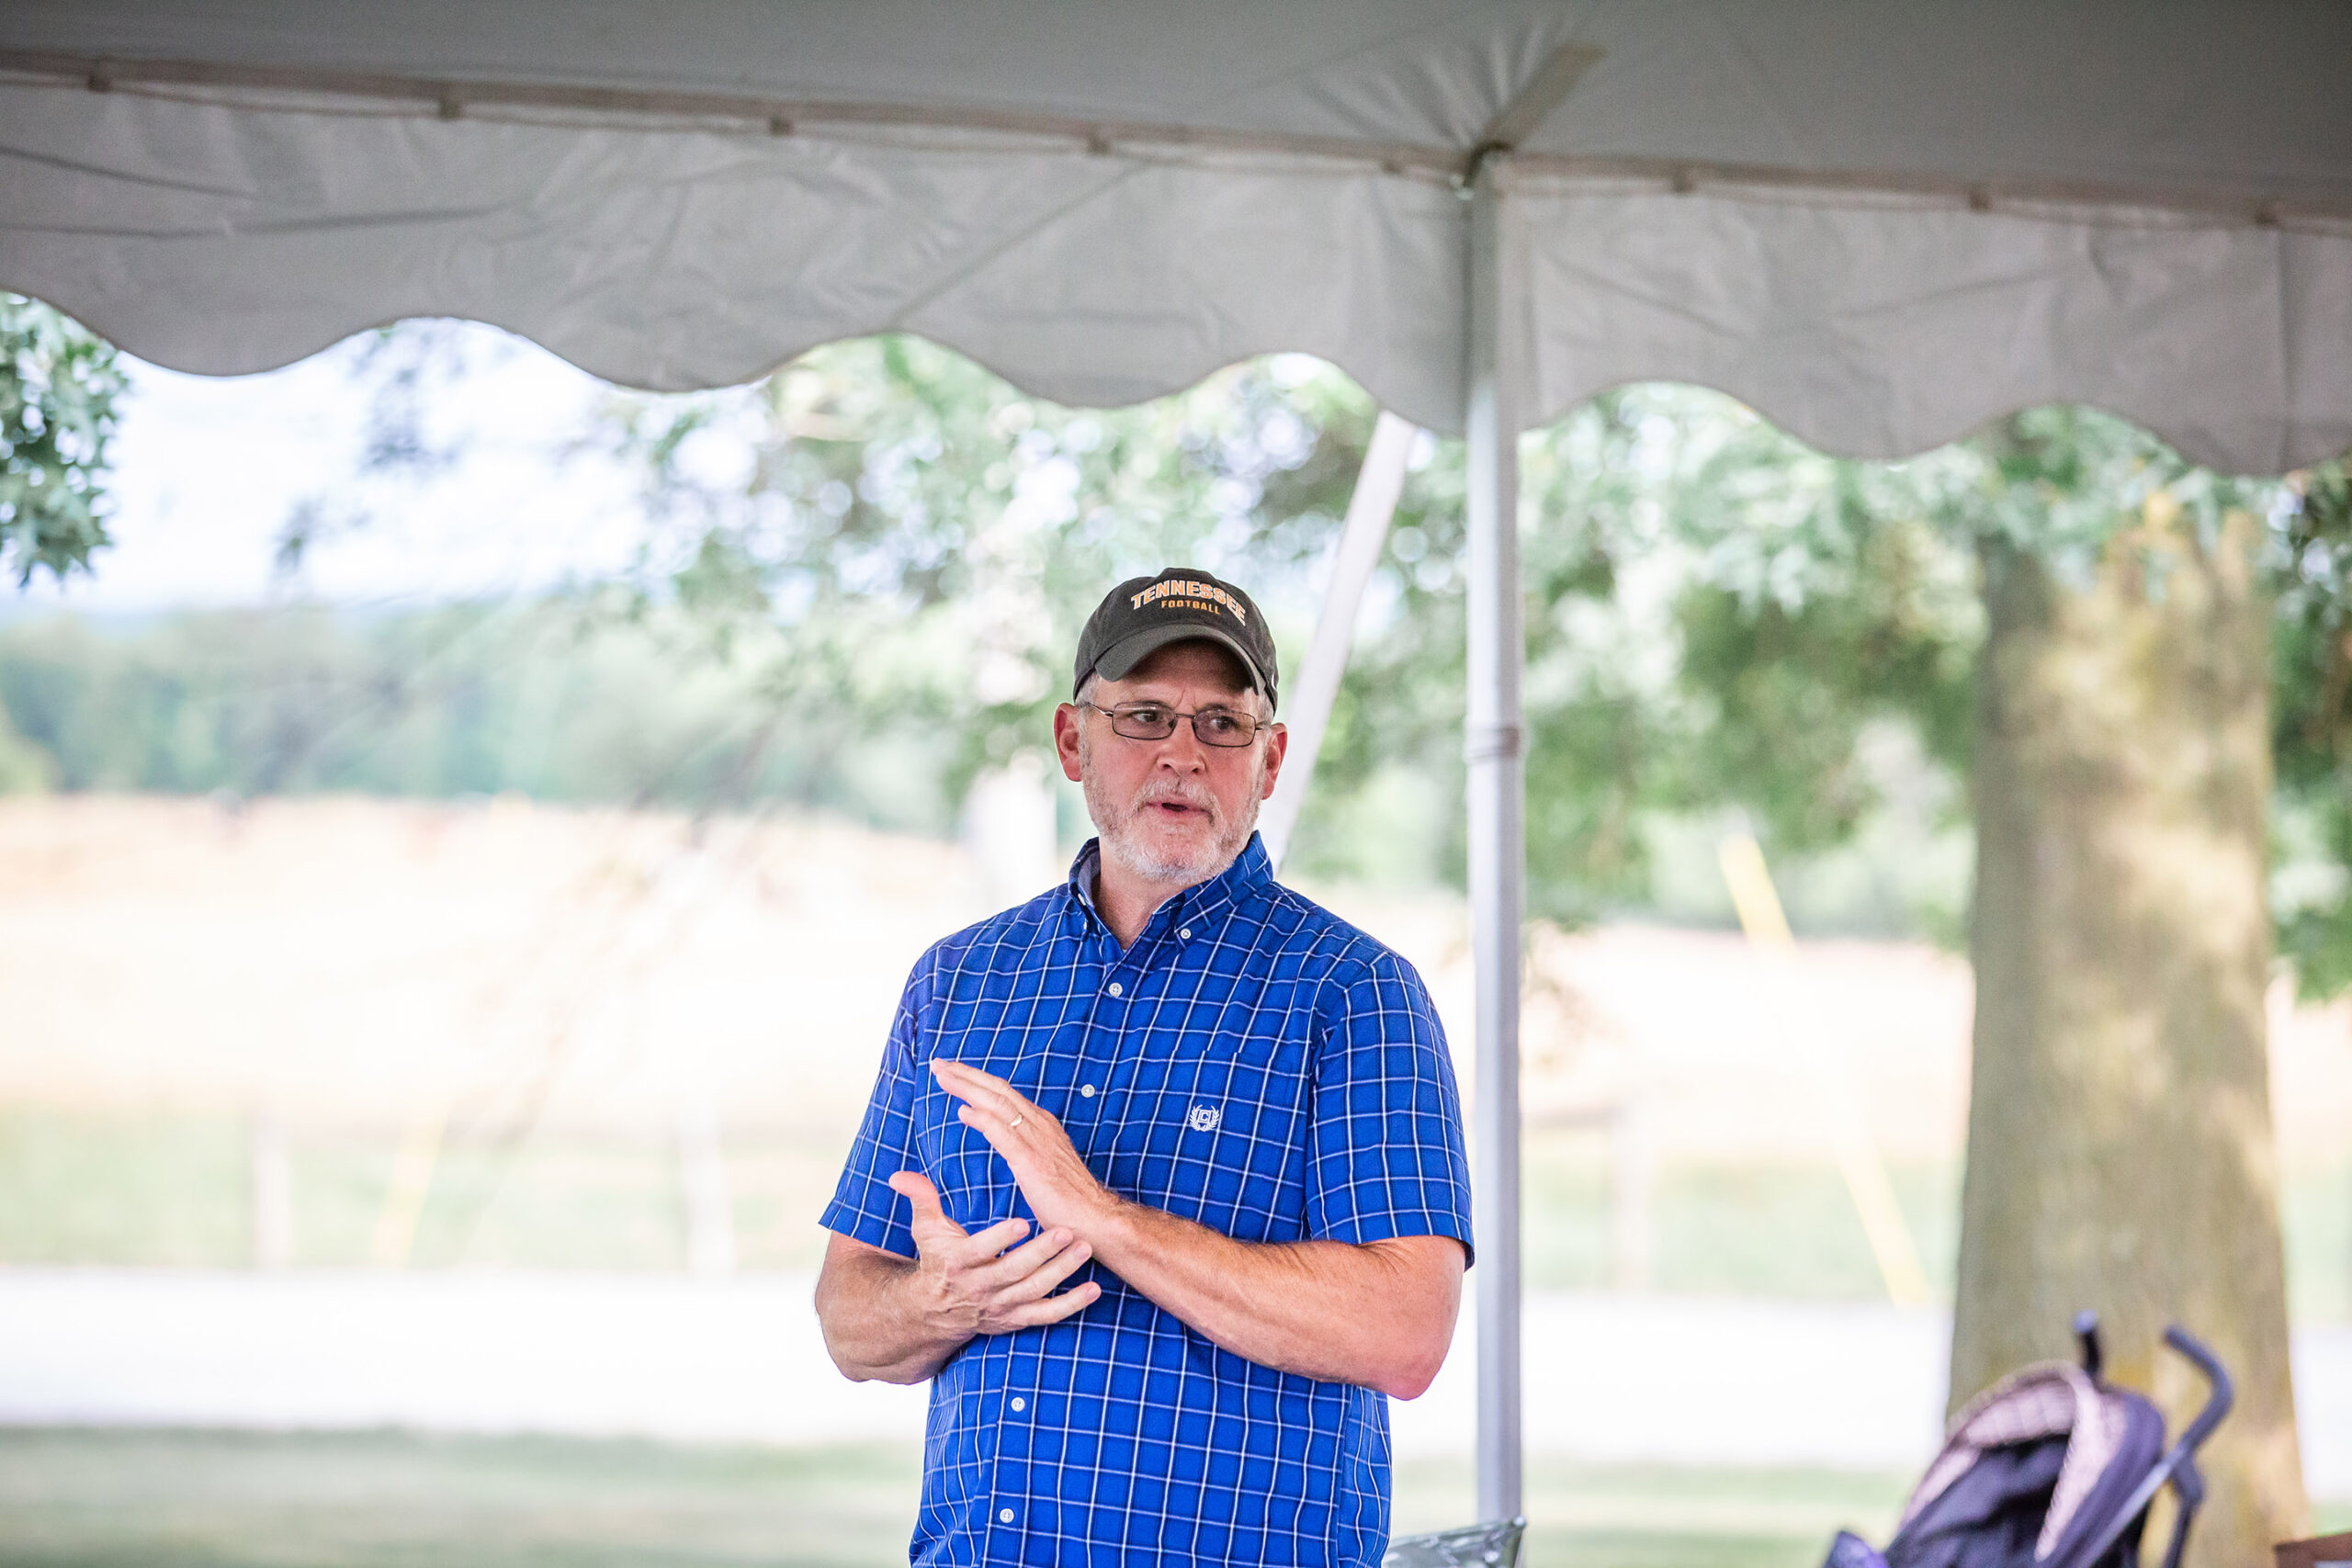 Dr. Richard Doak, DVM of Mid-Maryland Vets speaks with YCs about the FARM program during Maryland & Virginia Milk Producers Young Cooperator Summer Break at Teabow Farms on July 27, 2022.